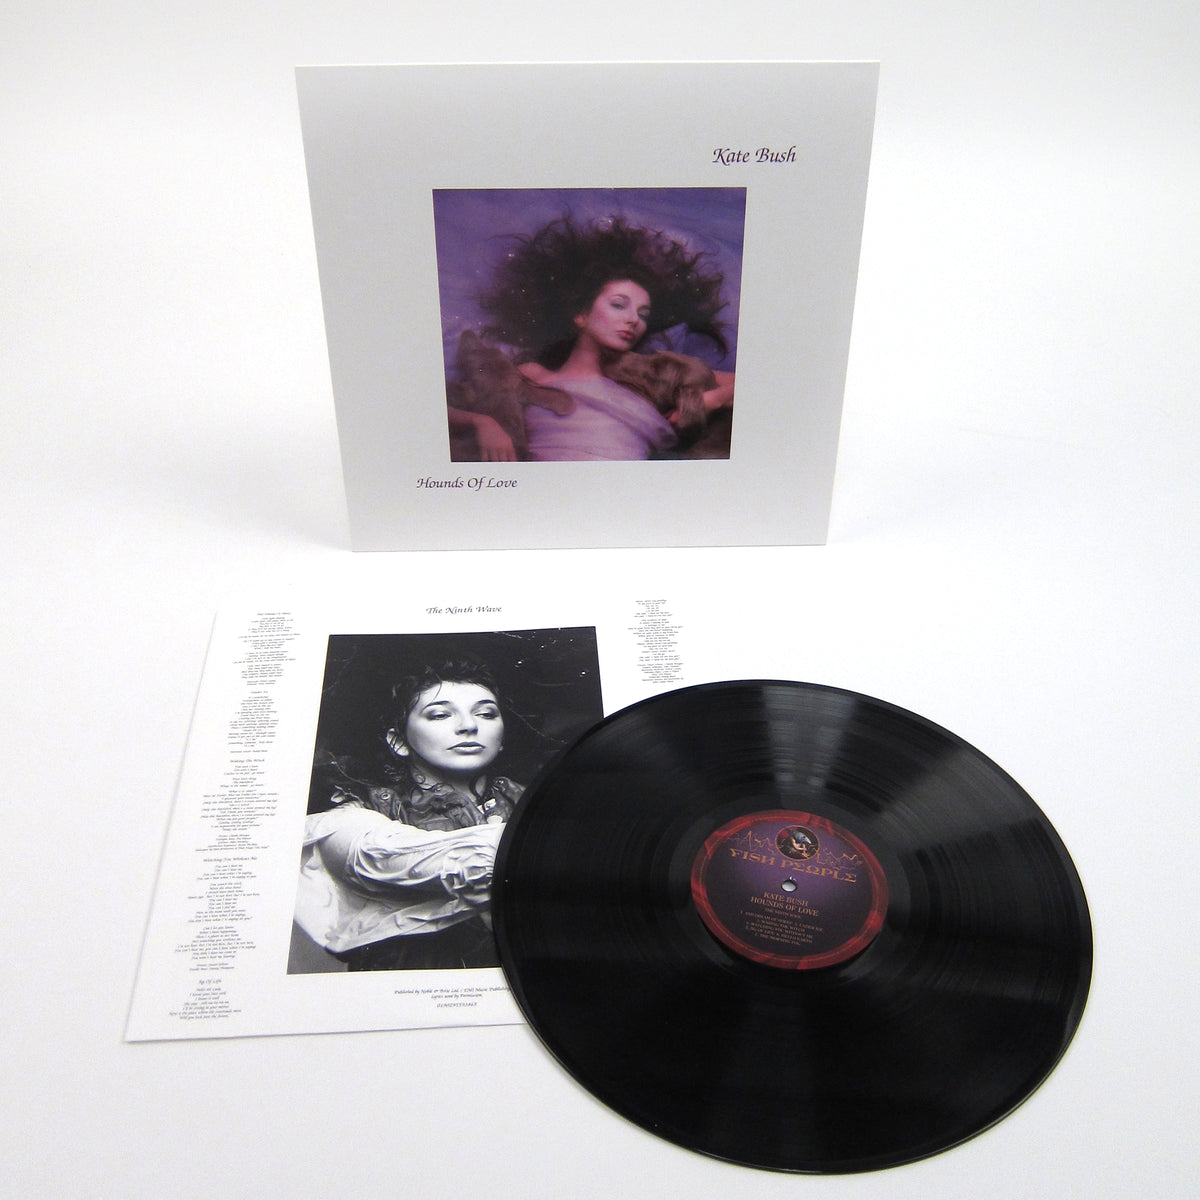 hounds of love review kate bush